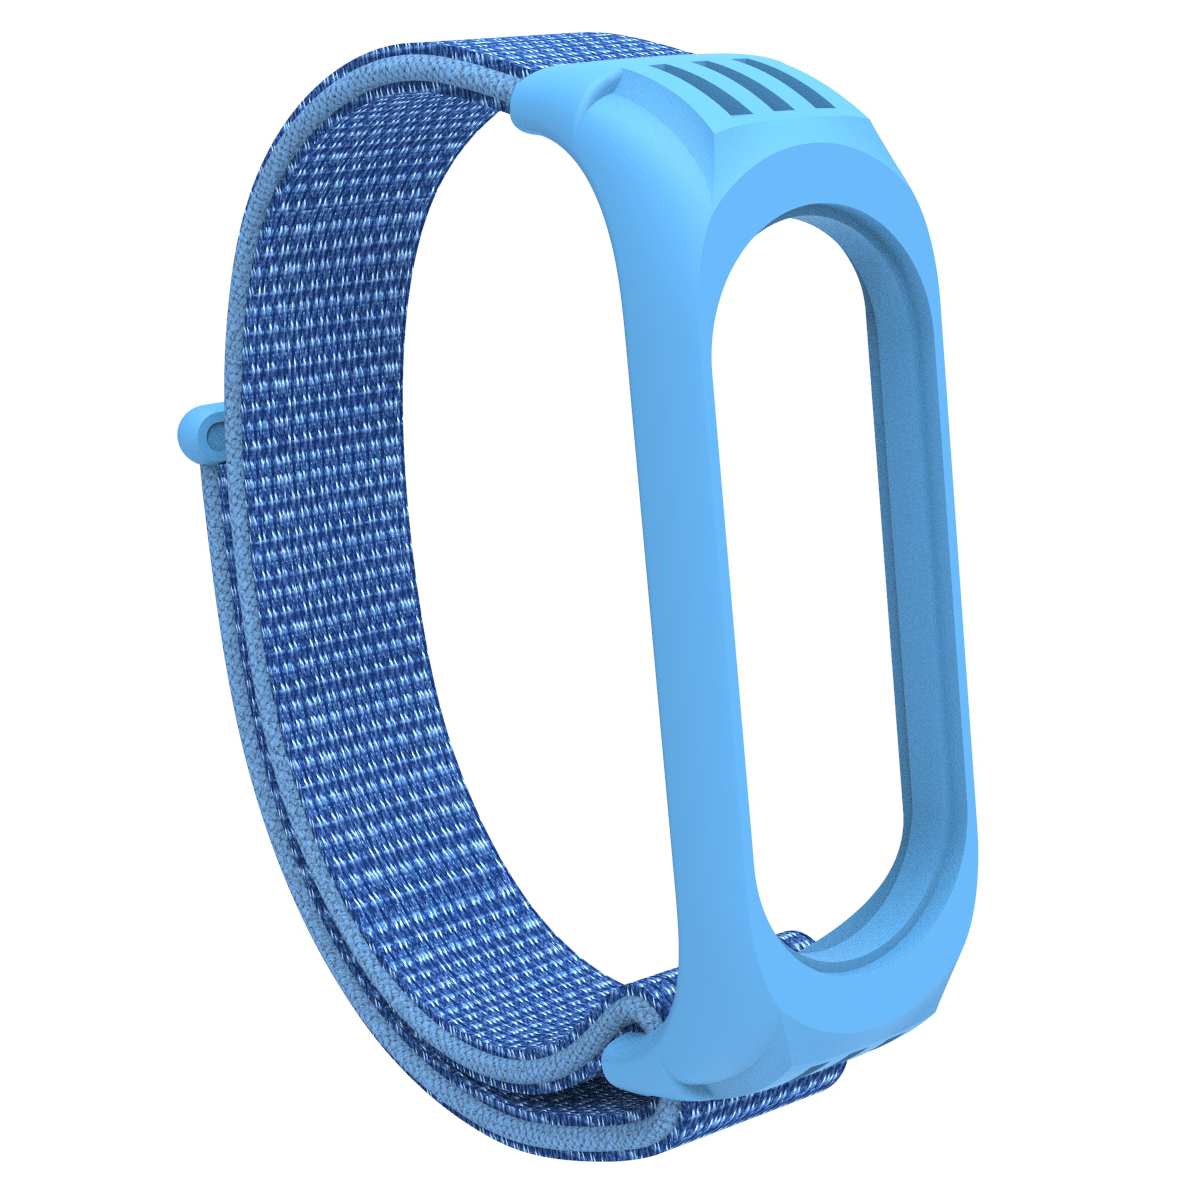 Holdmi-2-IN-1-Comfortable-Nylon-Watch-Strap-Band--TPU-Watch-Case-Cover-Replacement-for-Xiaomi-Mi-Ban-1758522-18